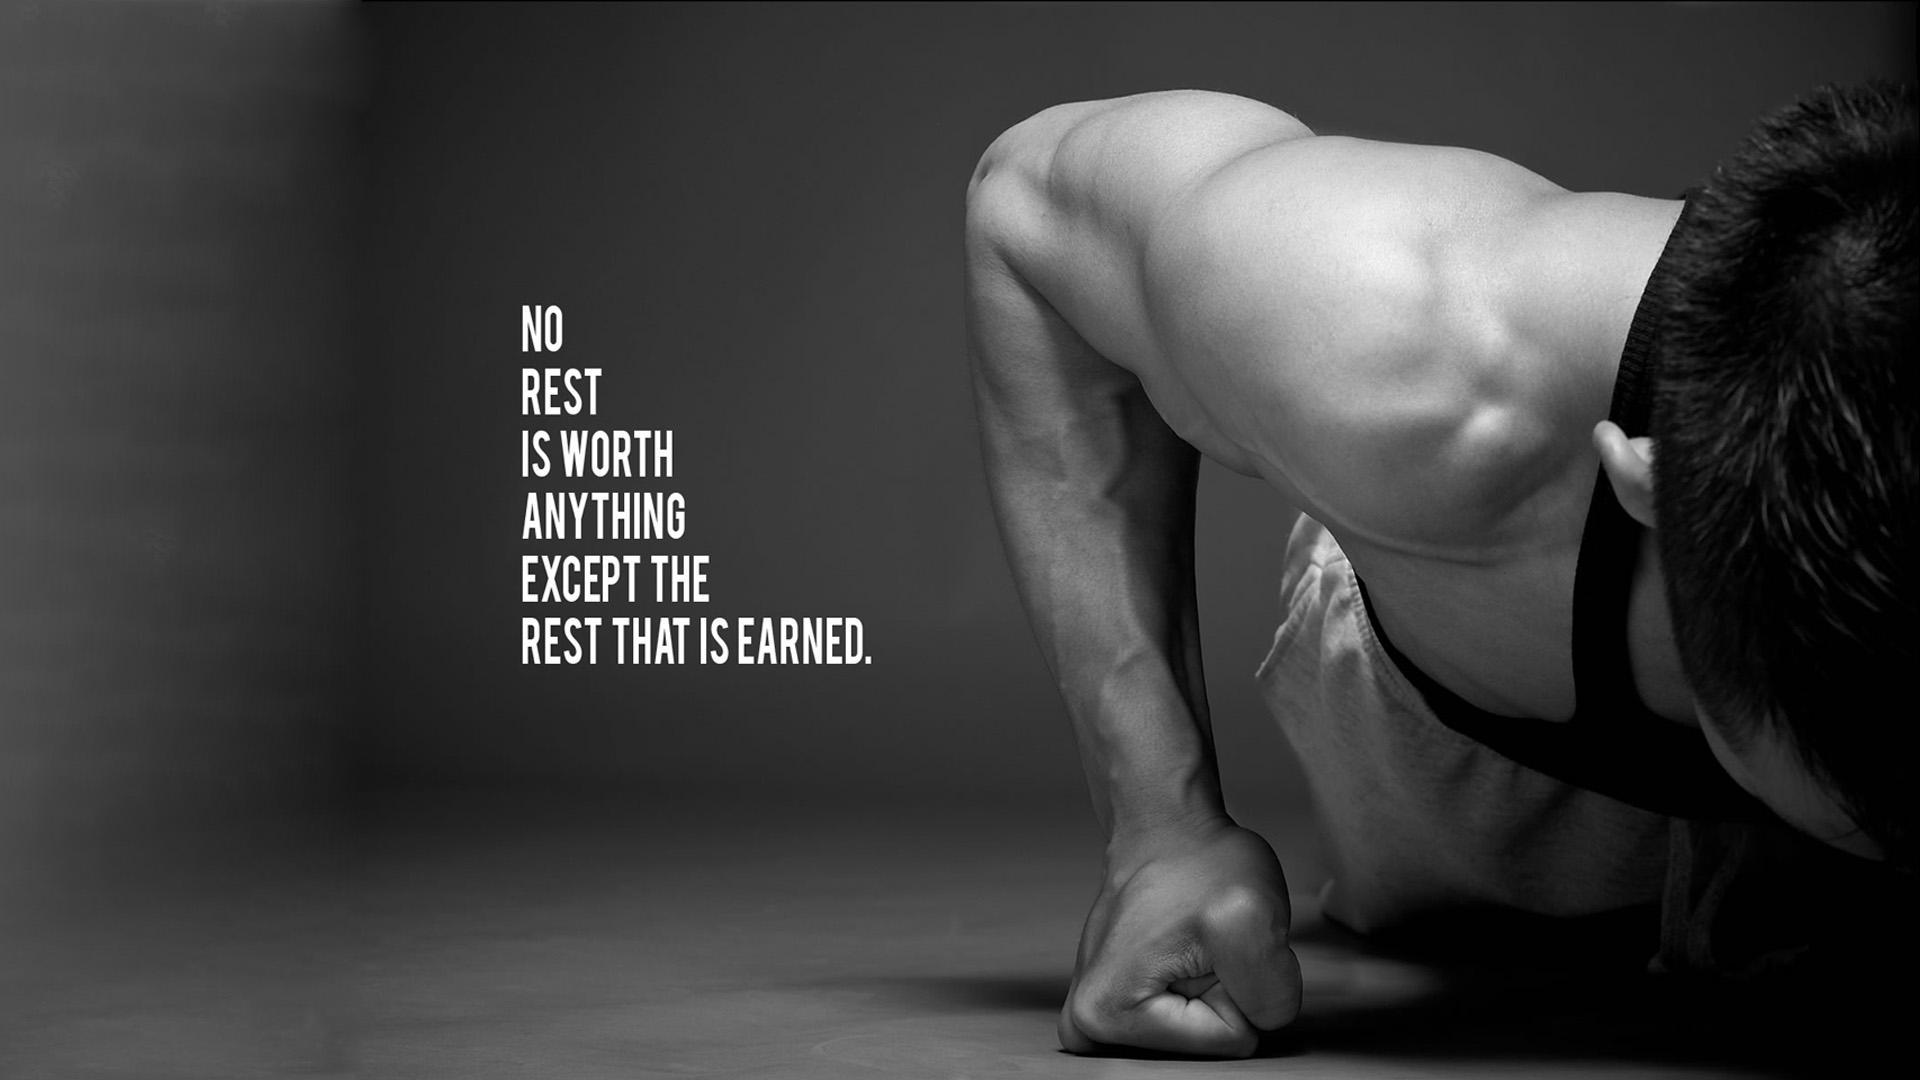 Text Quotes Monochrome Bodybuilding Strength Motivational Posters